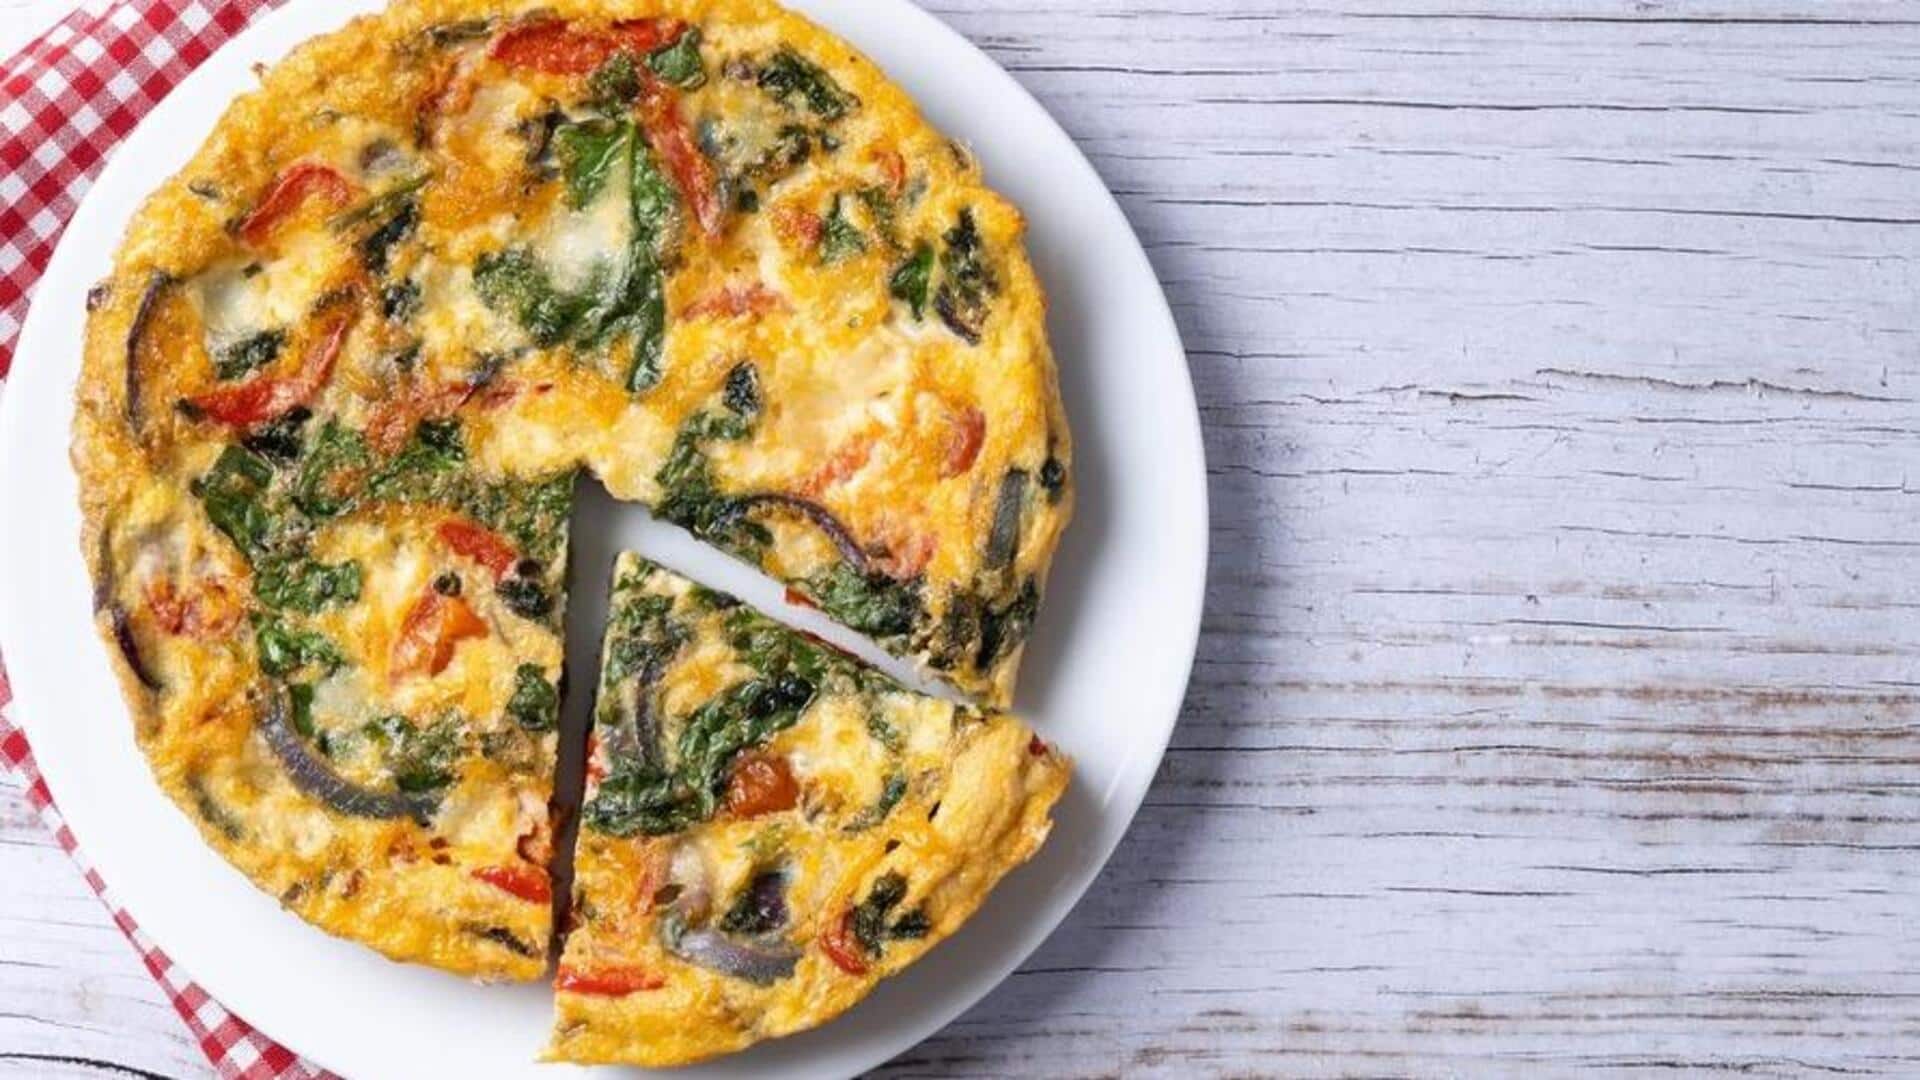 Recipe: Cook this eggless vegetarian quiche lorraine today